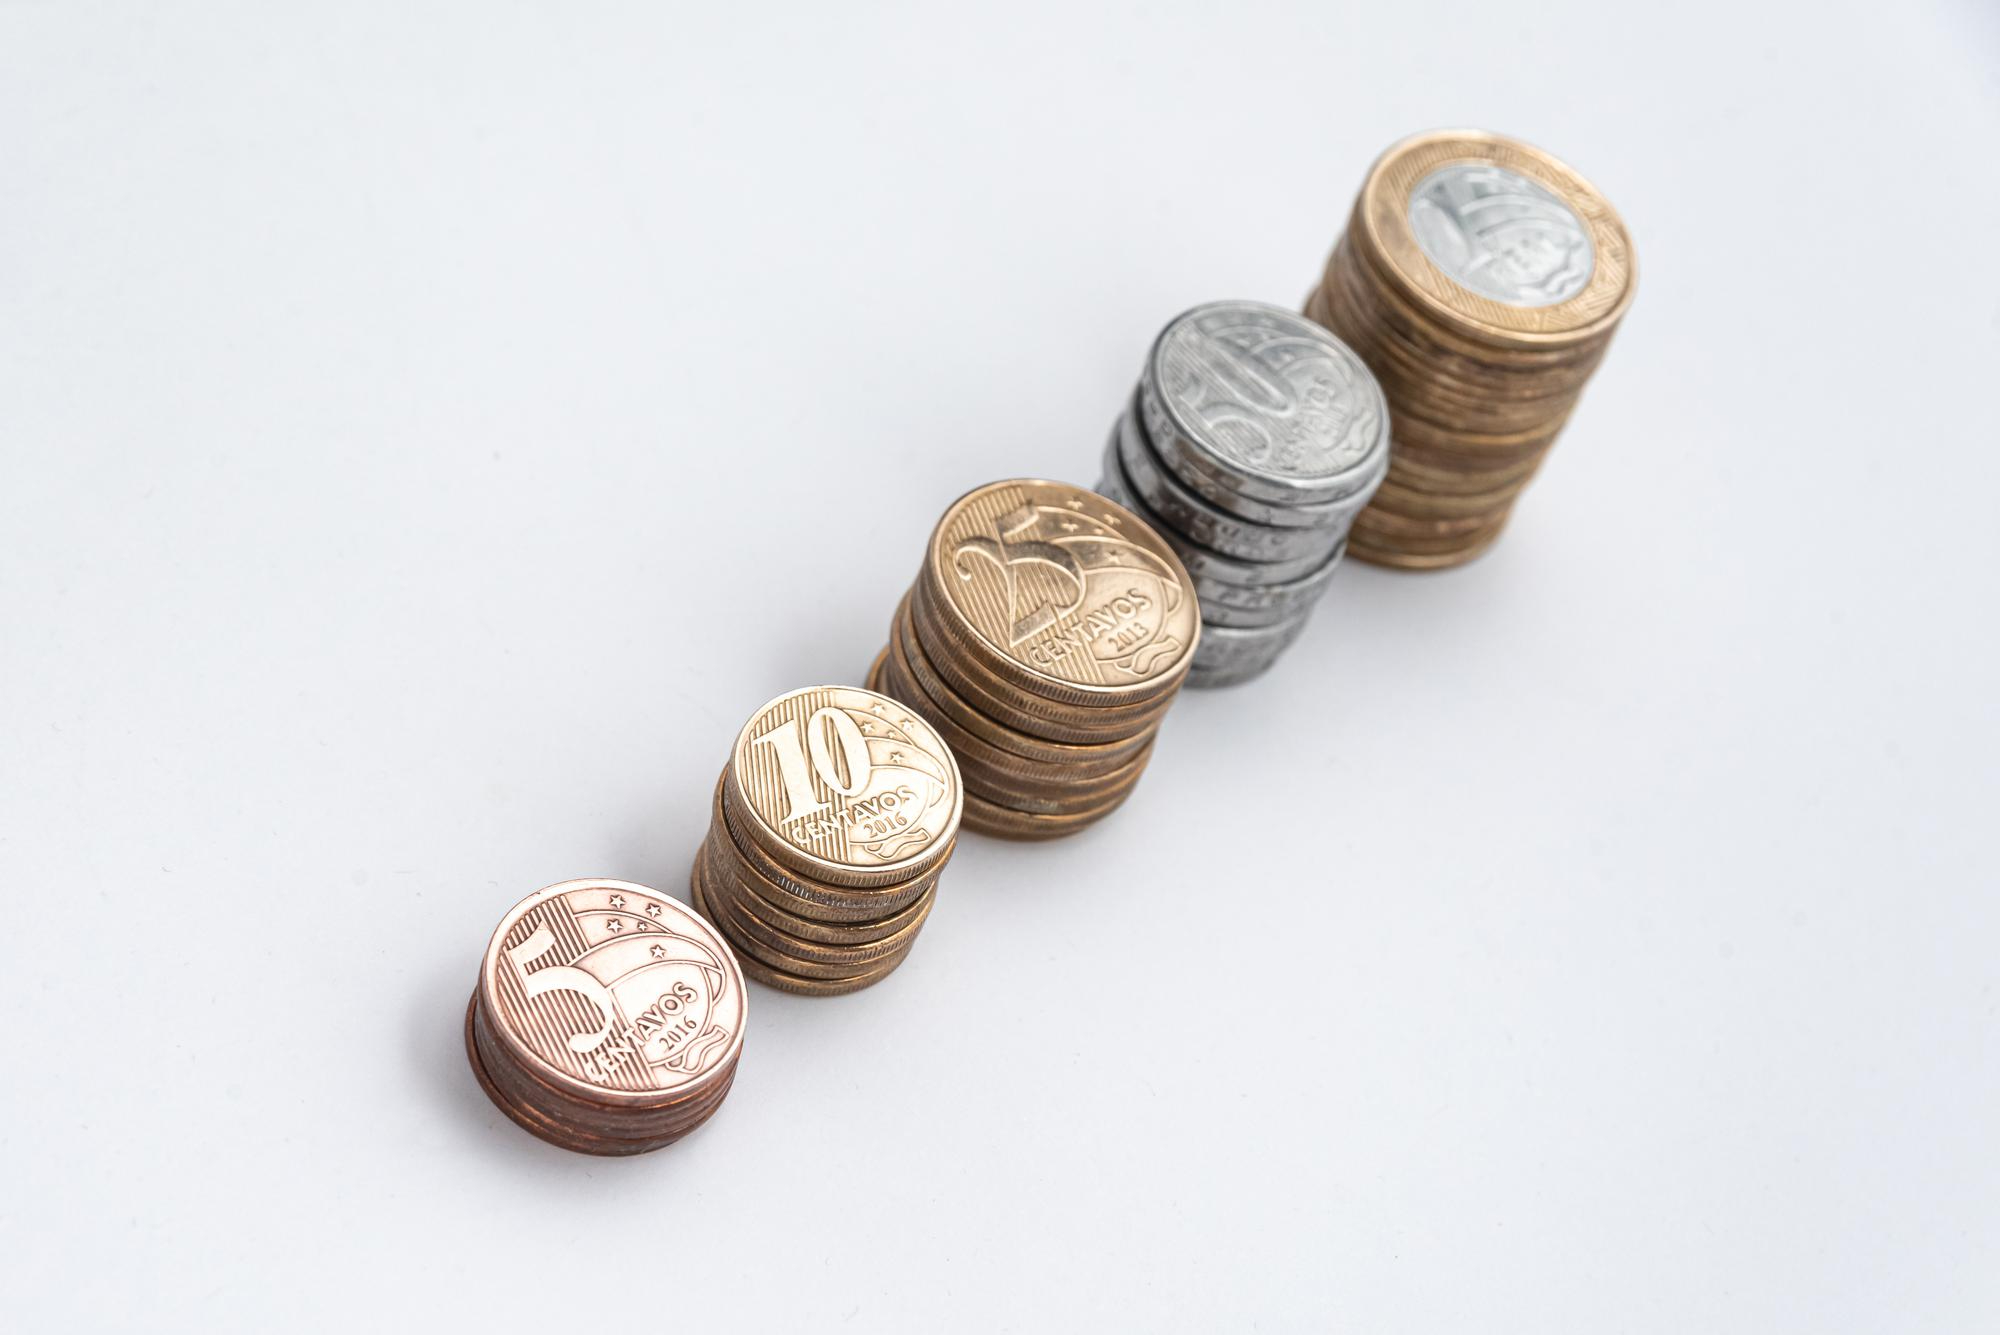 Many columns of coins that illustrate the pay rise as a percentage of current salary